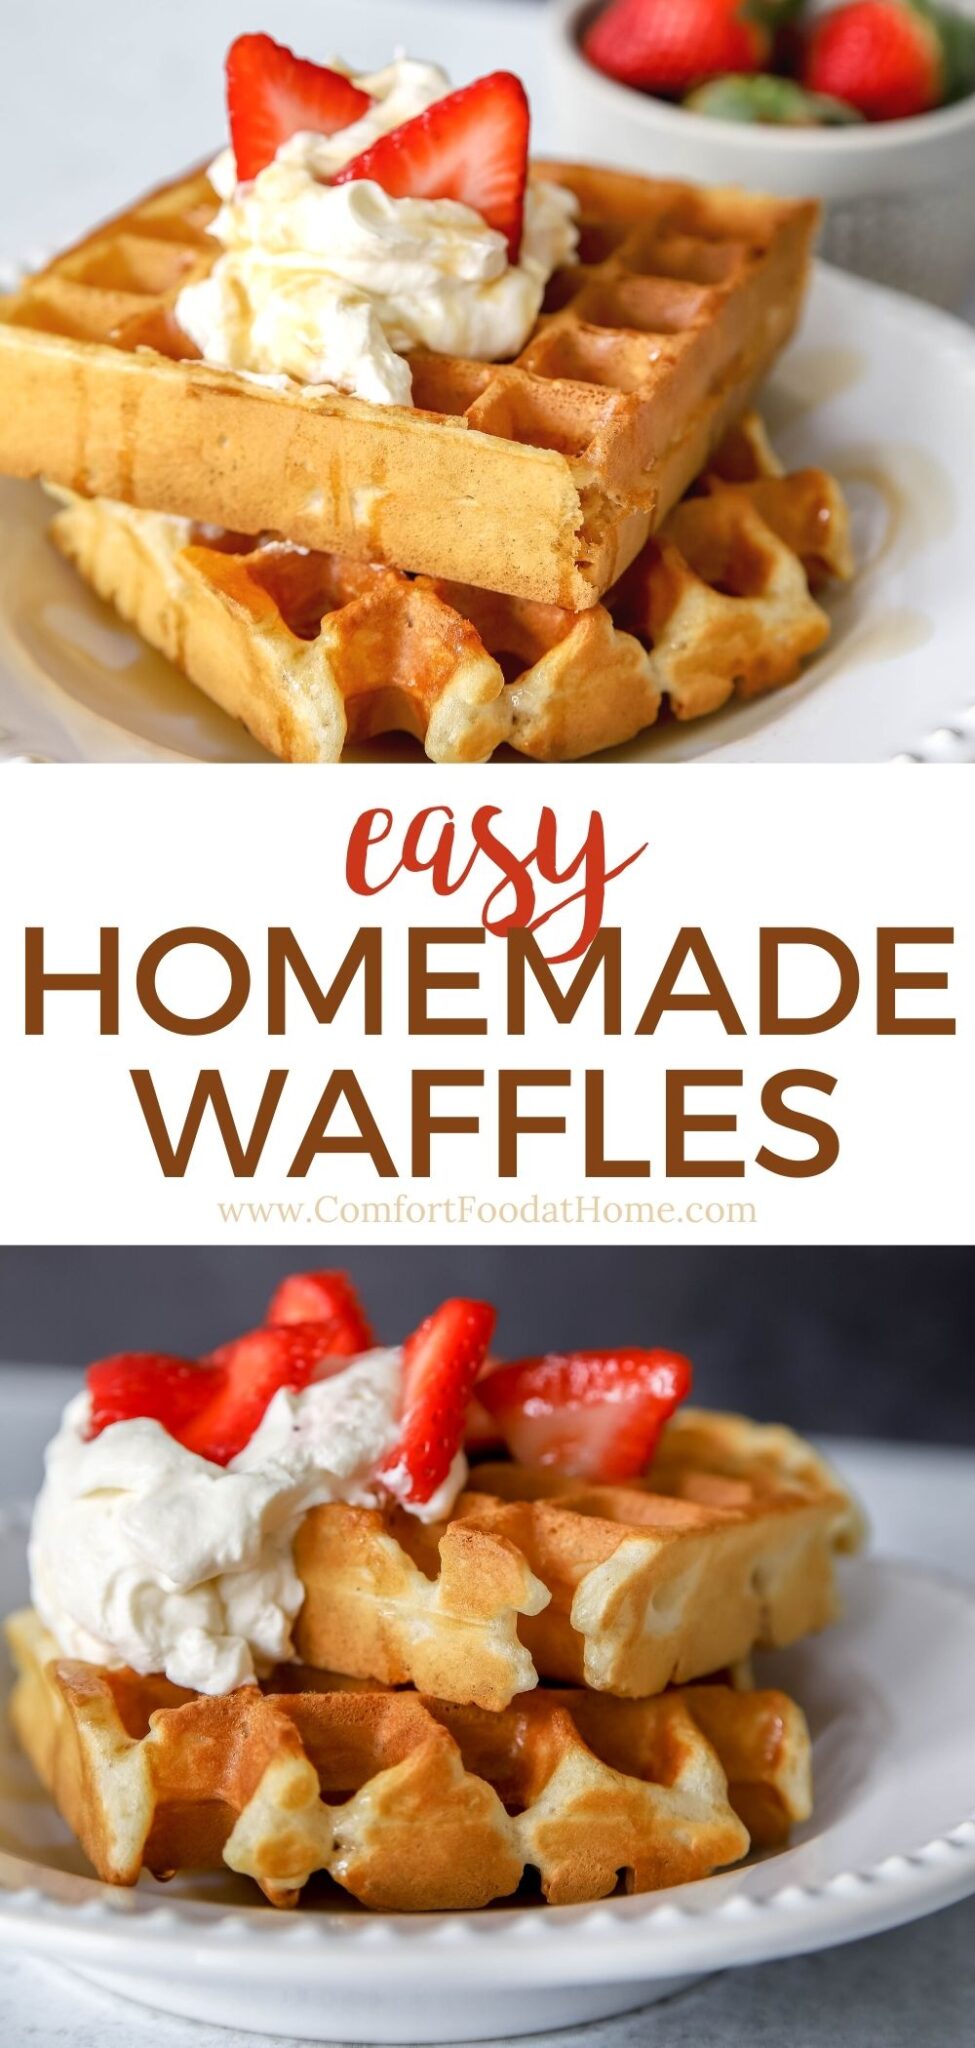 Easy Homemade Waffle Recipe - Comfort Food at Home